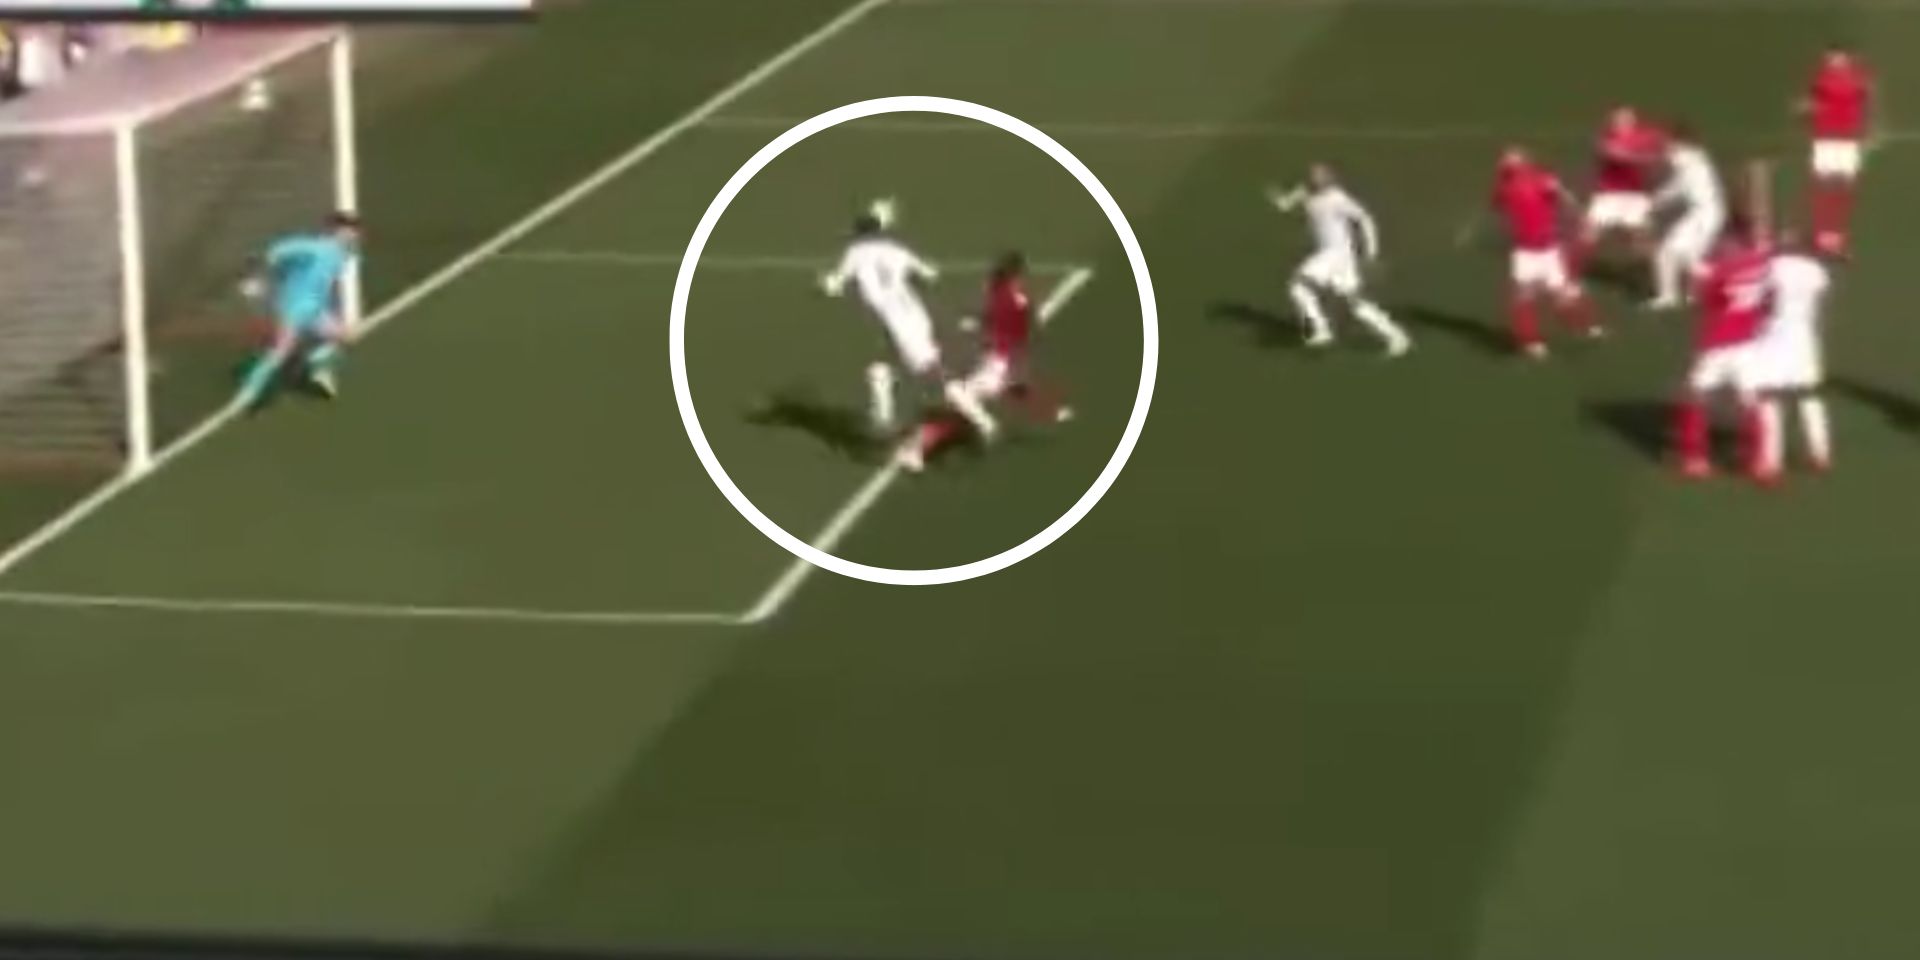 (Video) Van Dijk passes on free header goal opportunity six yards away in favour of finding Firmino